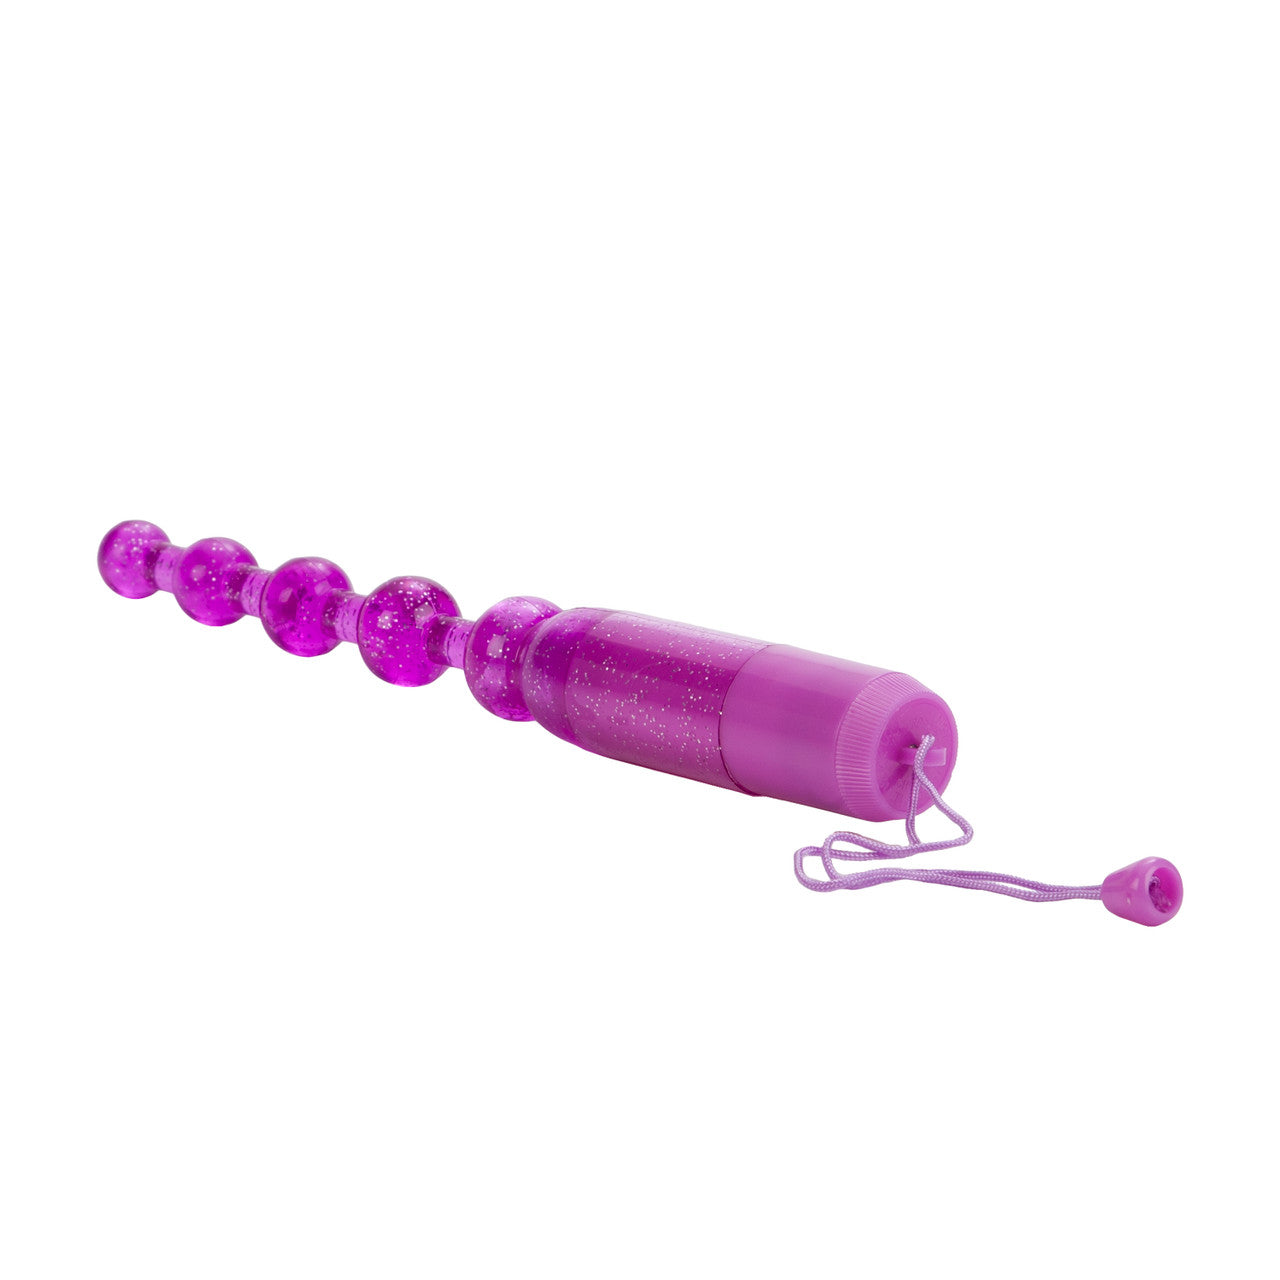 Waterproof Vibrating Pleasure Beads - Purple - Thorn & Feather Sex Toy Canada